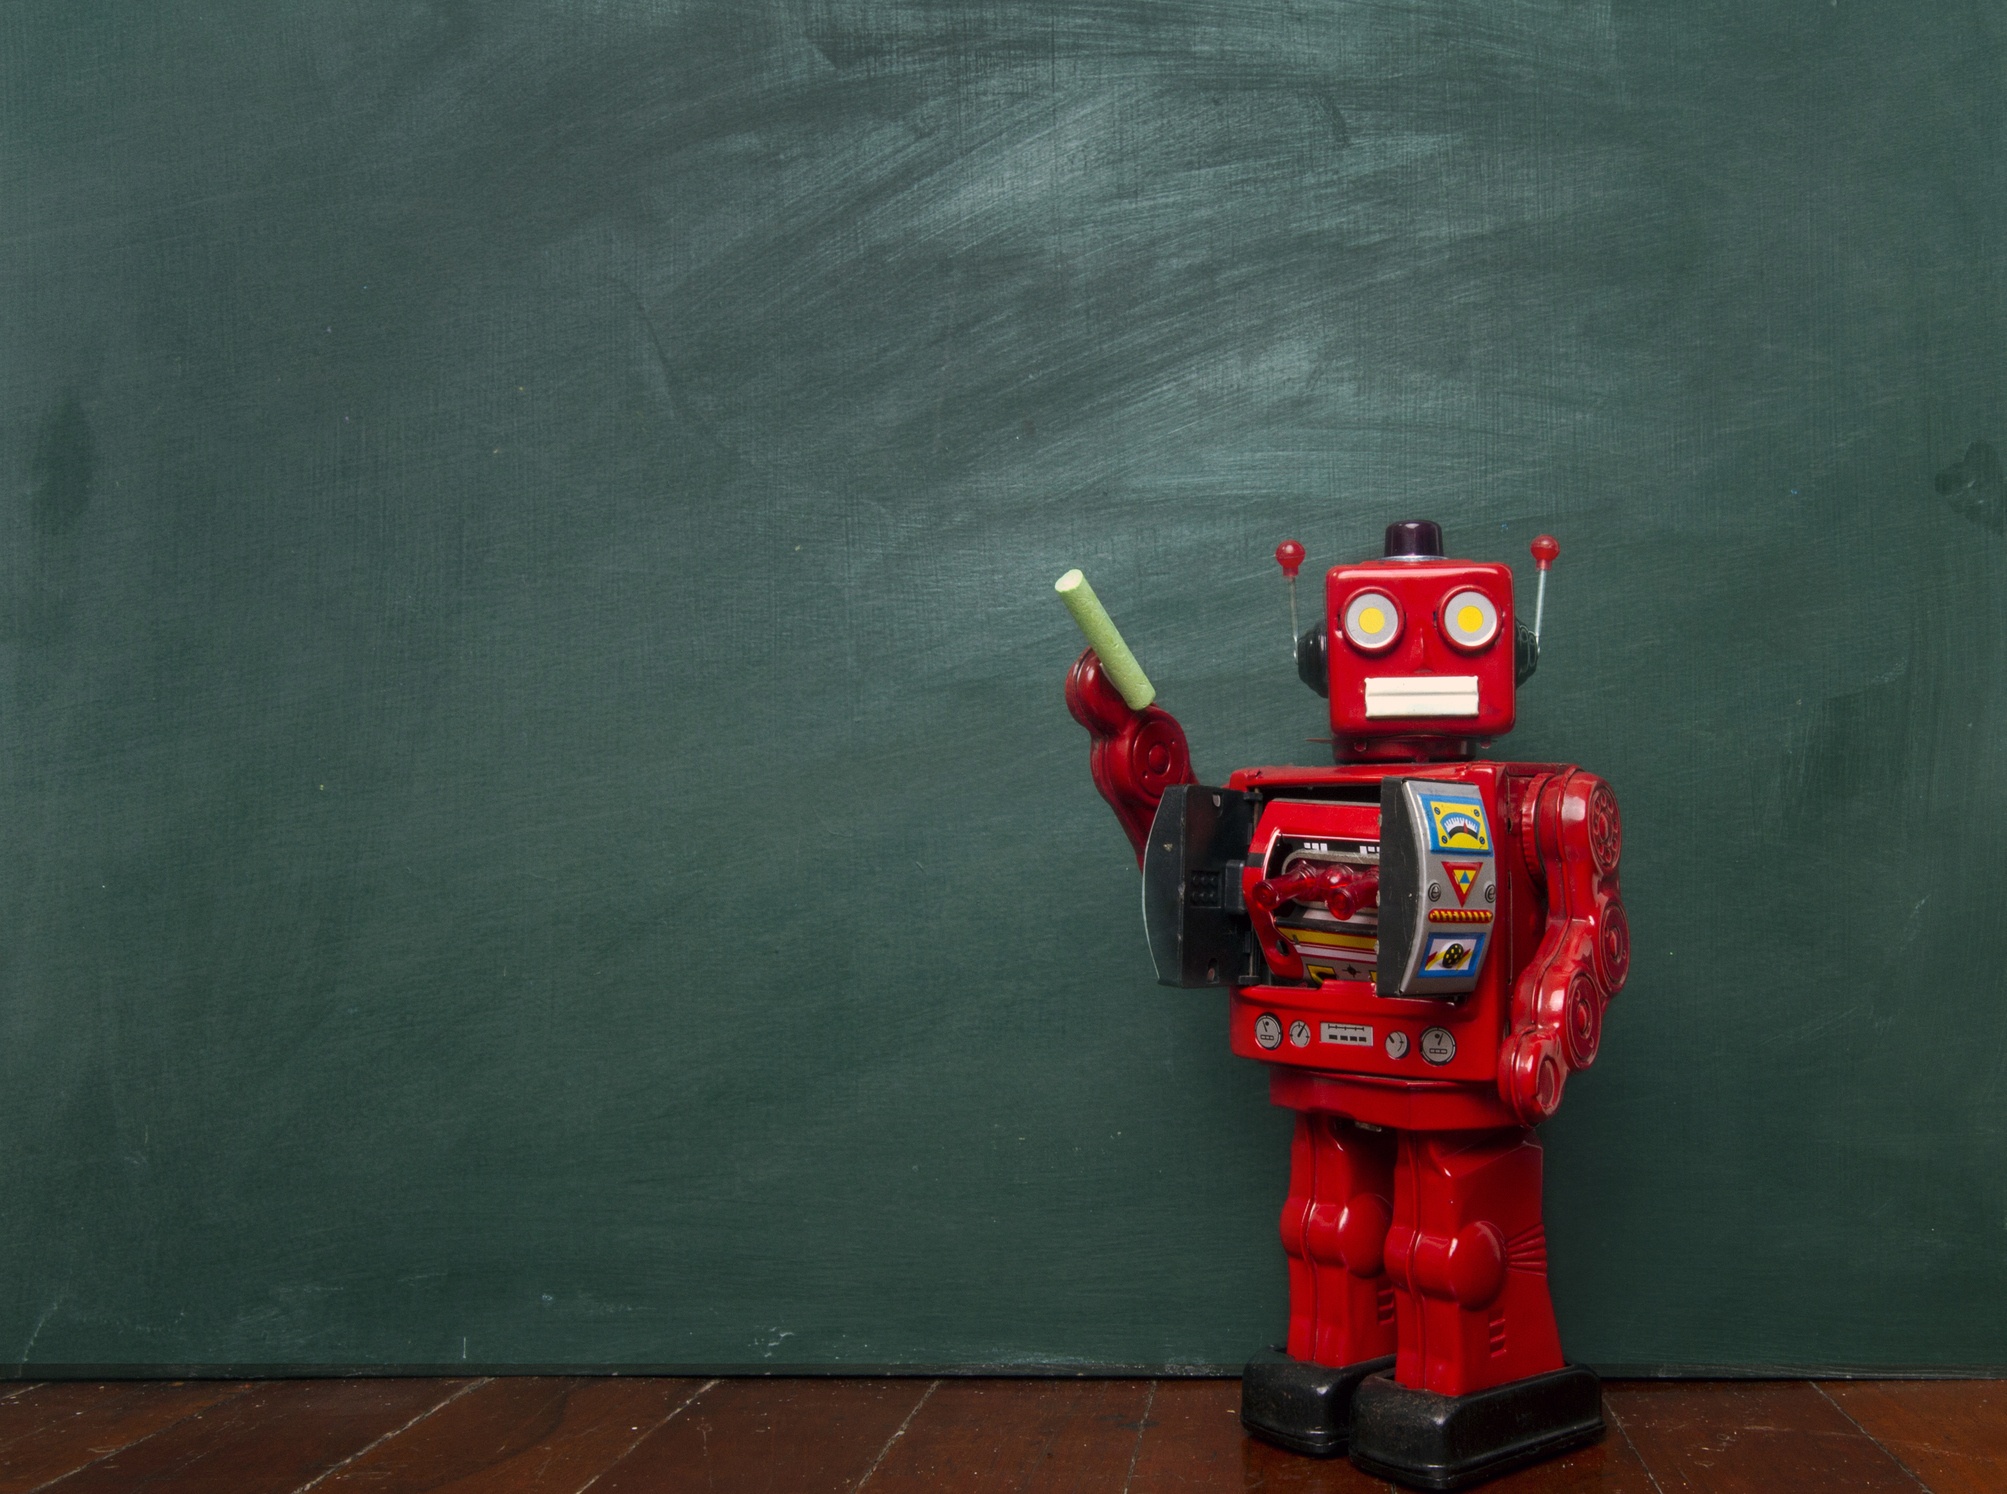 A red 1950's style robot stands before a blank chalk board, holding a piece of chalk, ready to write - Bee Digital Marketing